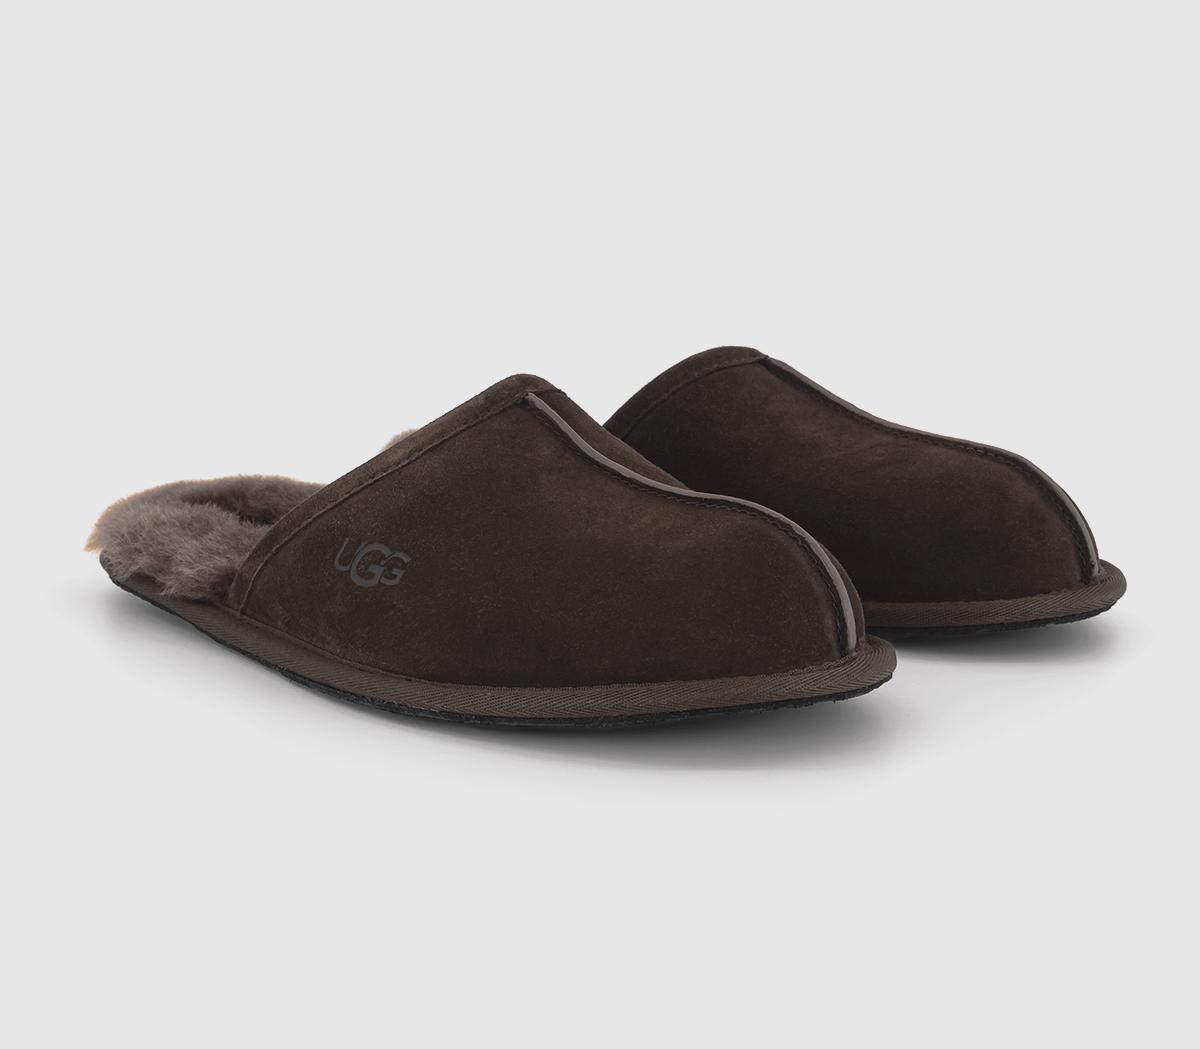 UGG Mens Scuff Slippers Dusted Cocoa Brown, 8